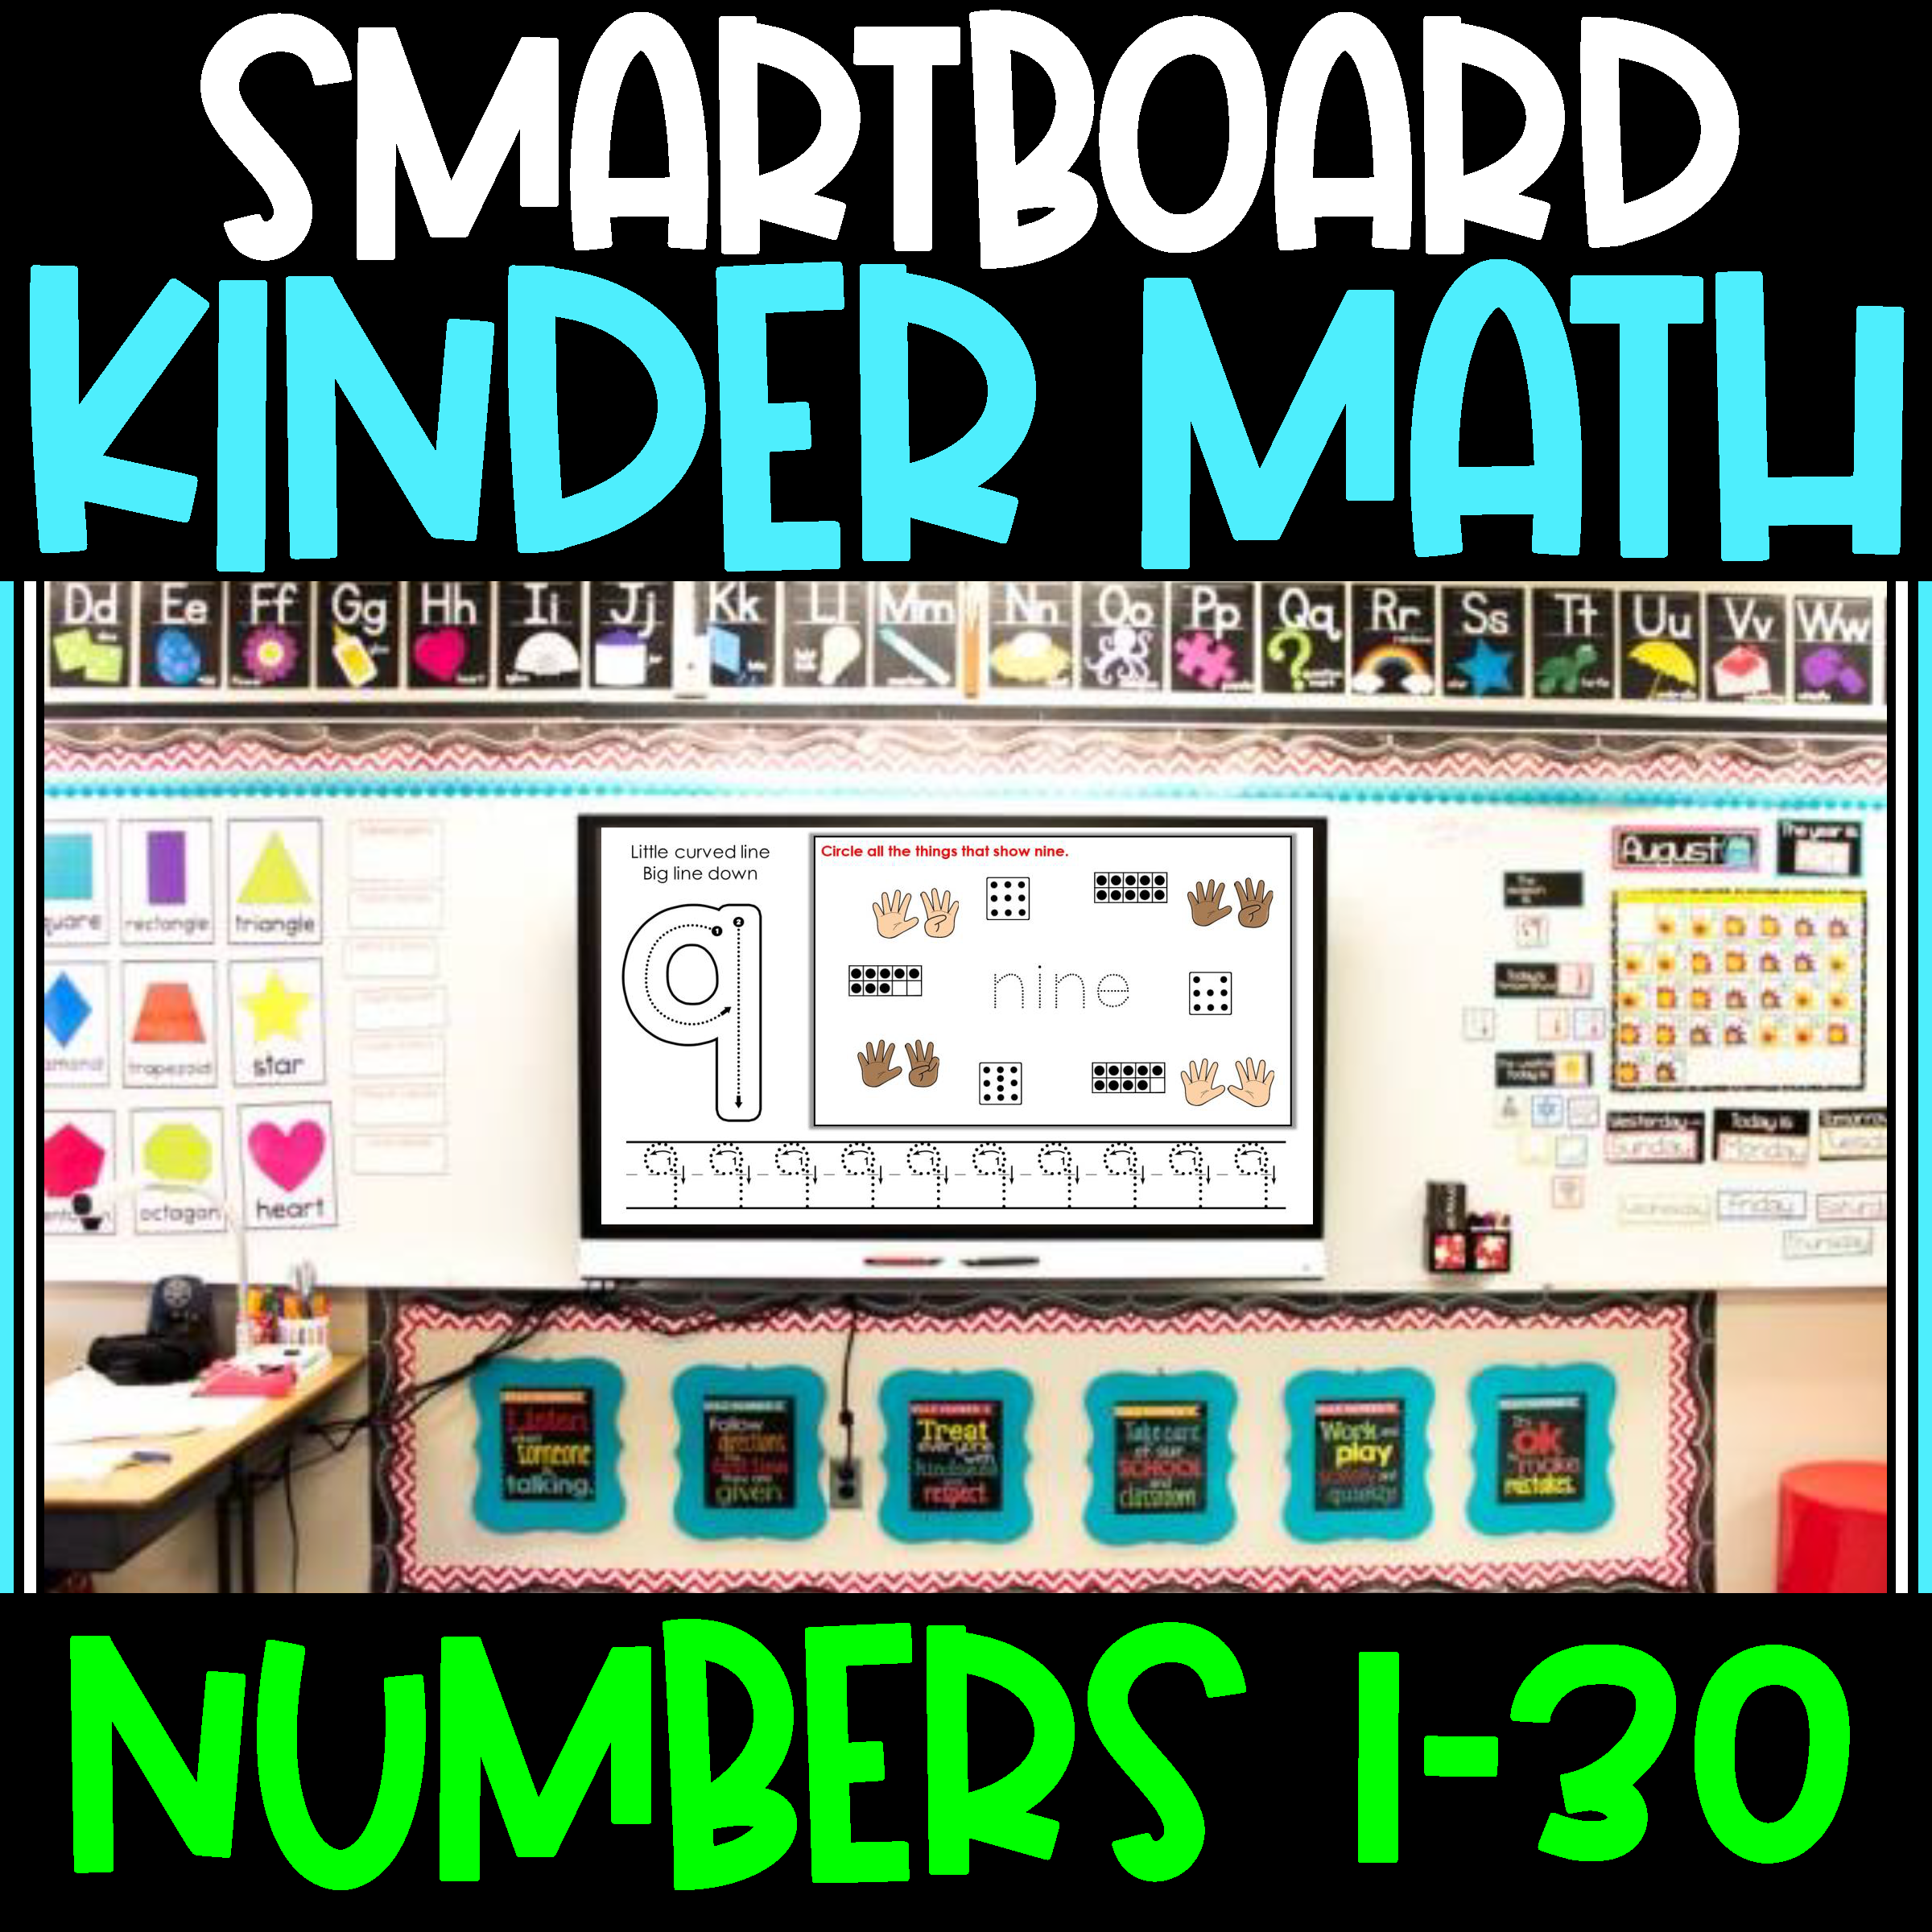 smartboard math number to 30